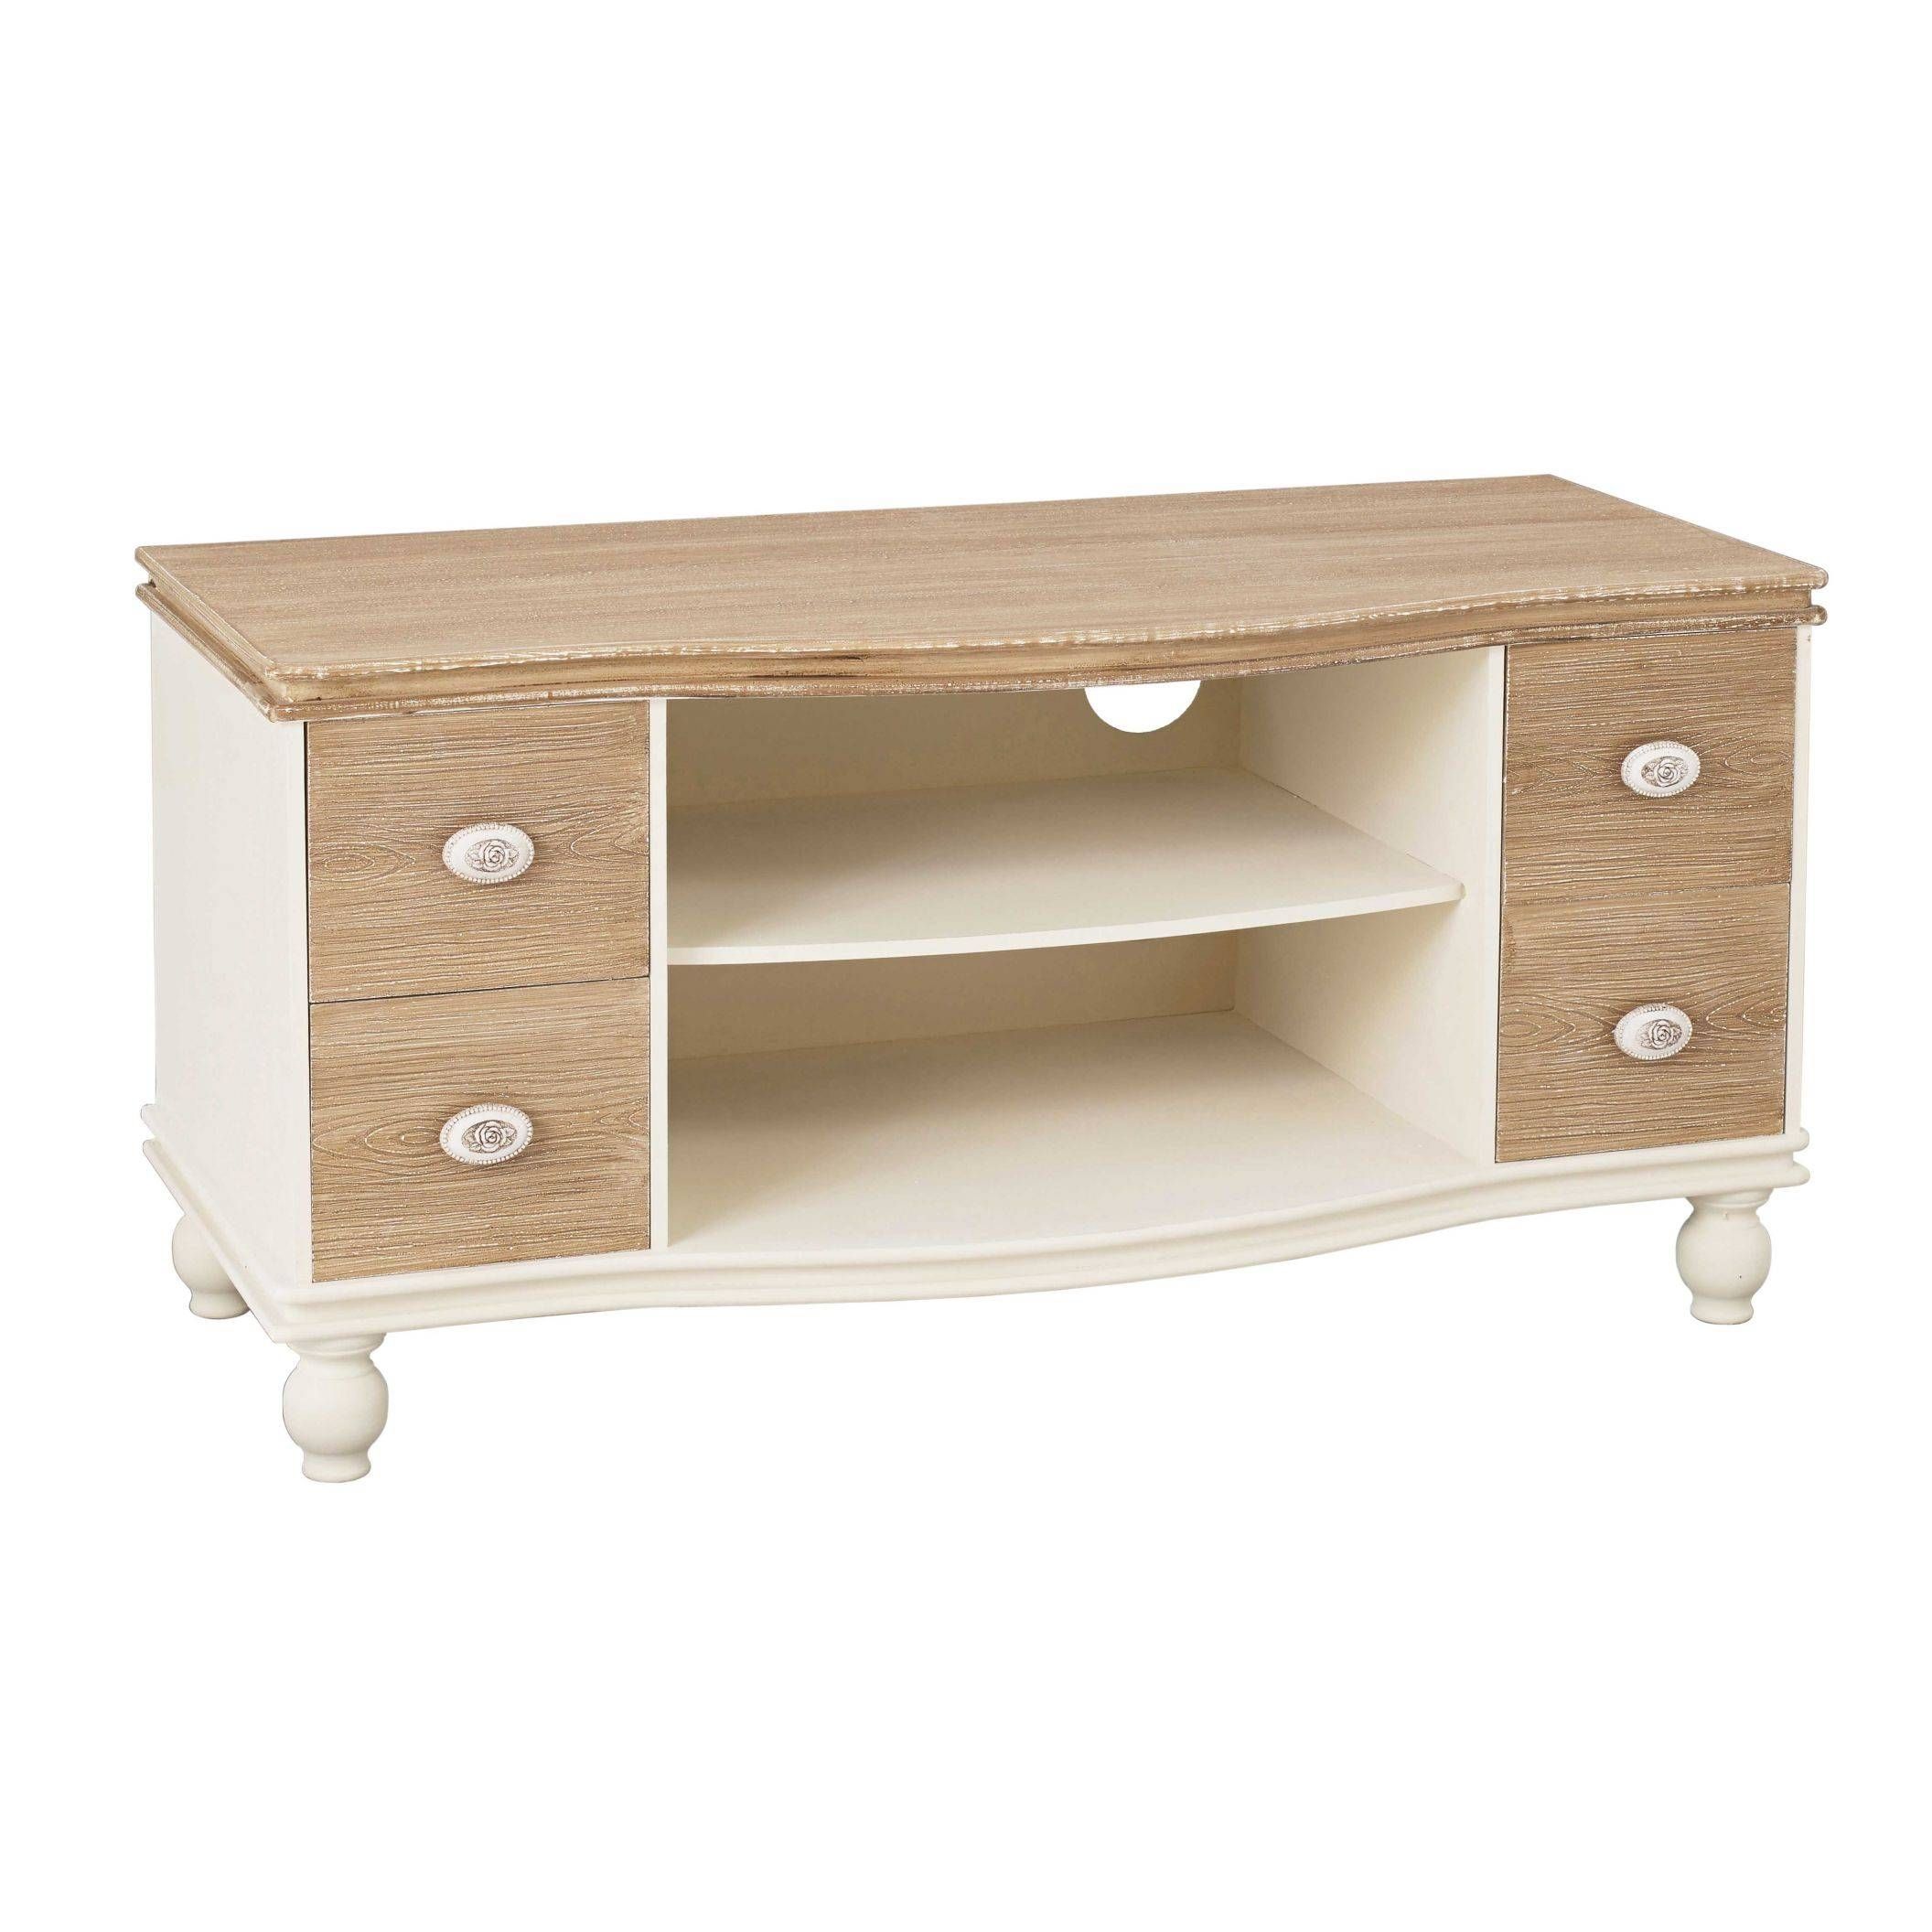 Juliette Shabby Chic Tv Unit | French Style Furniture In French Style Tv Cabinets (View 13 of 15)